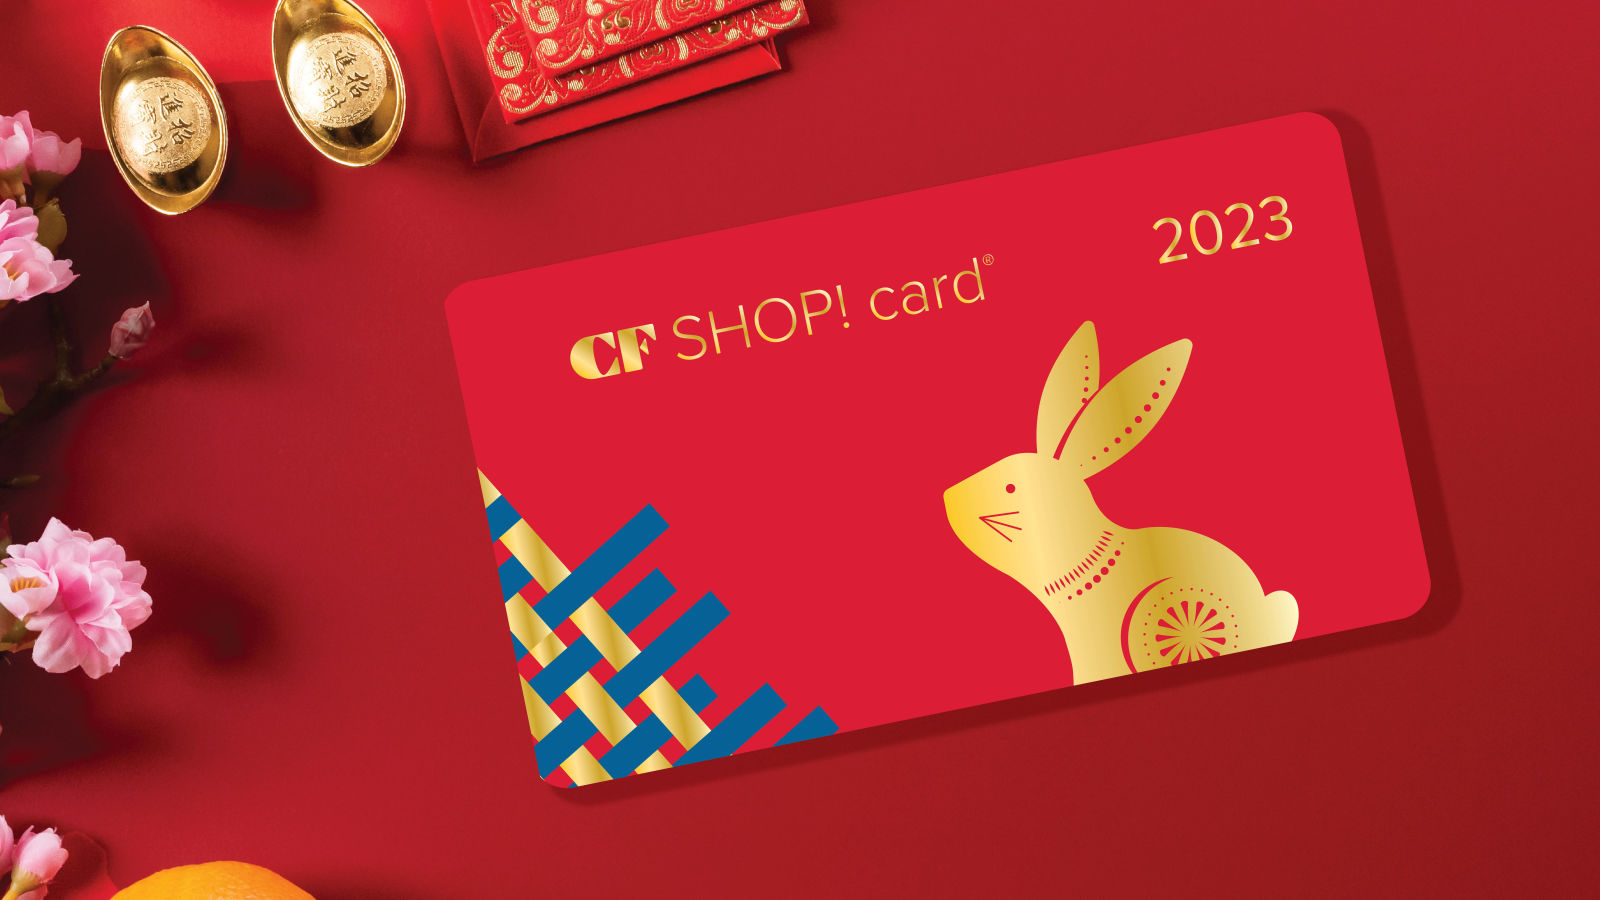 Chinook |  Lunar New Year 1920 x 1080 CF Shop! Card Event page image. 